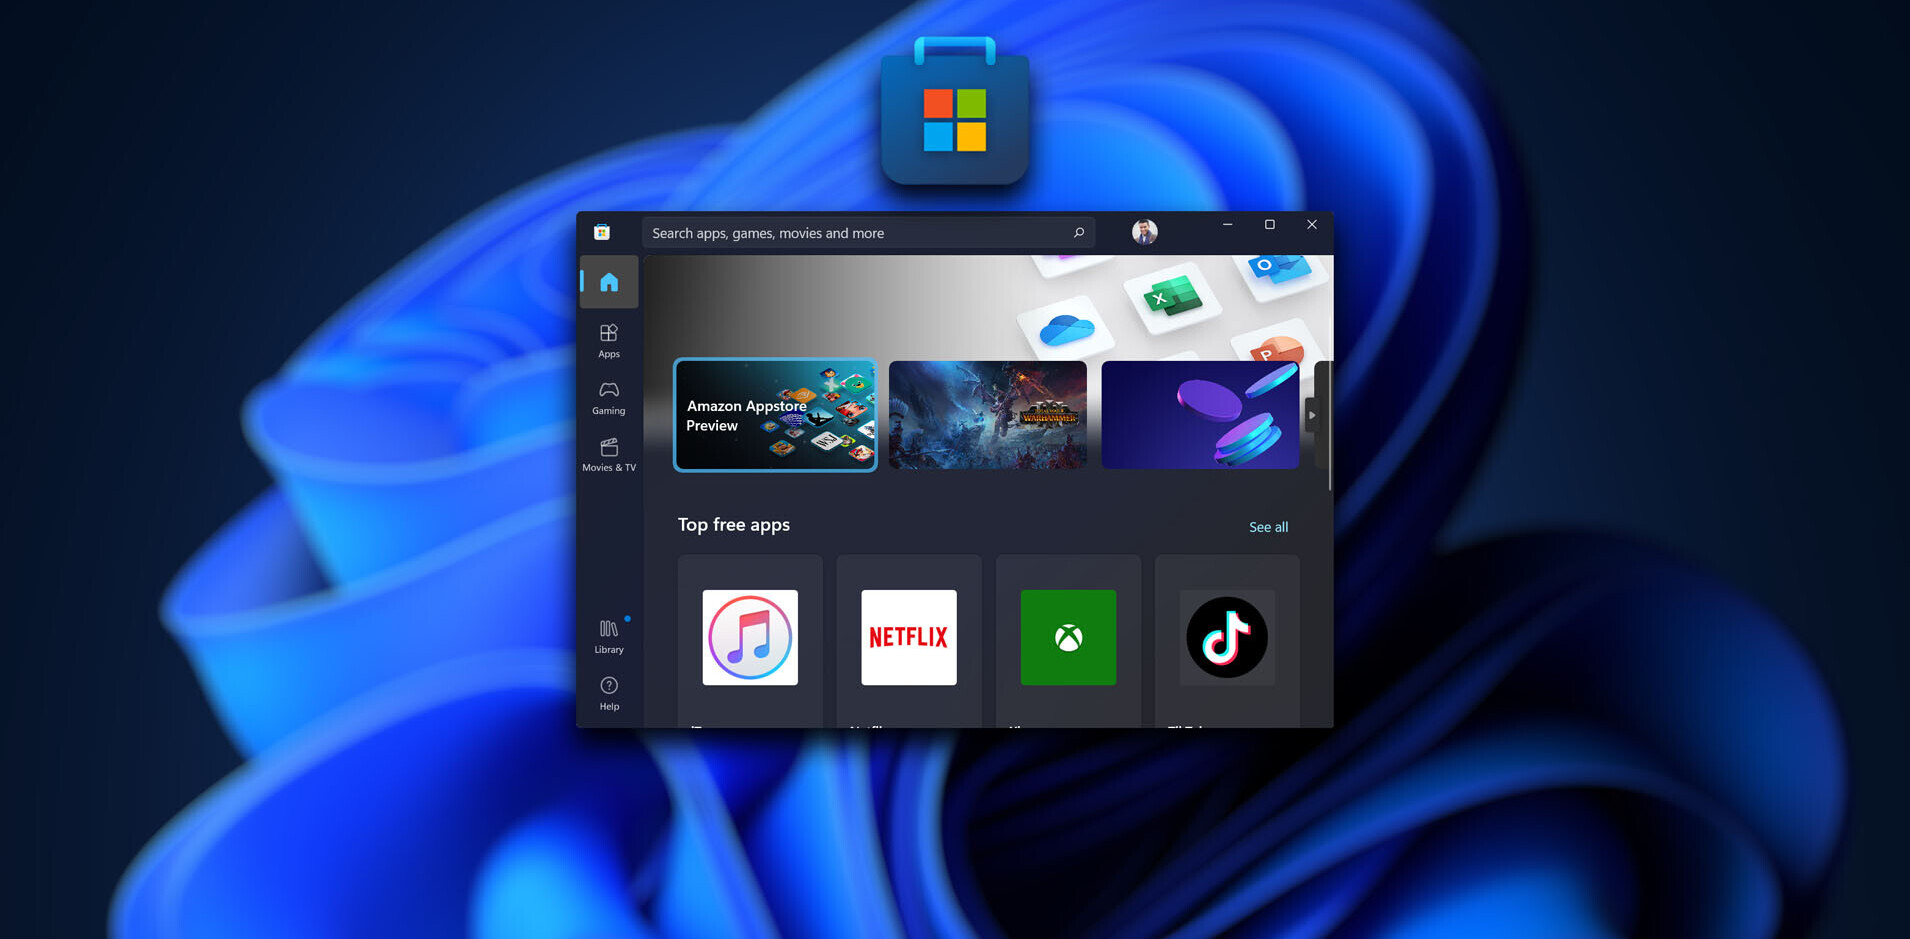 We tried a bunch of free Windows apps from the Microsoft Store — here are our favorites